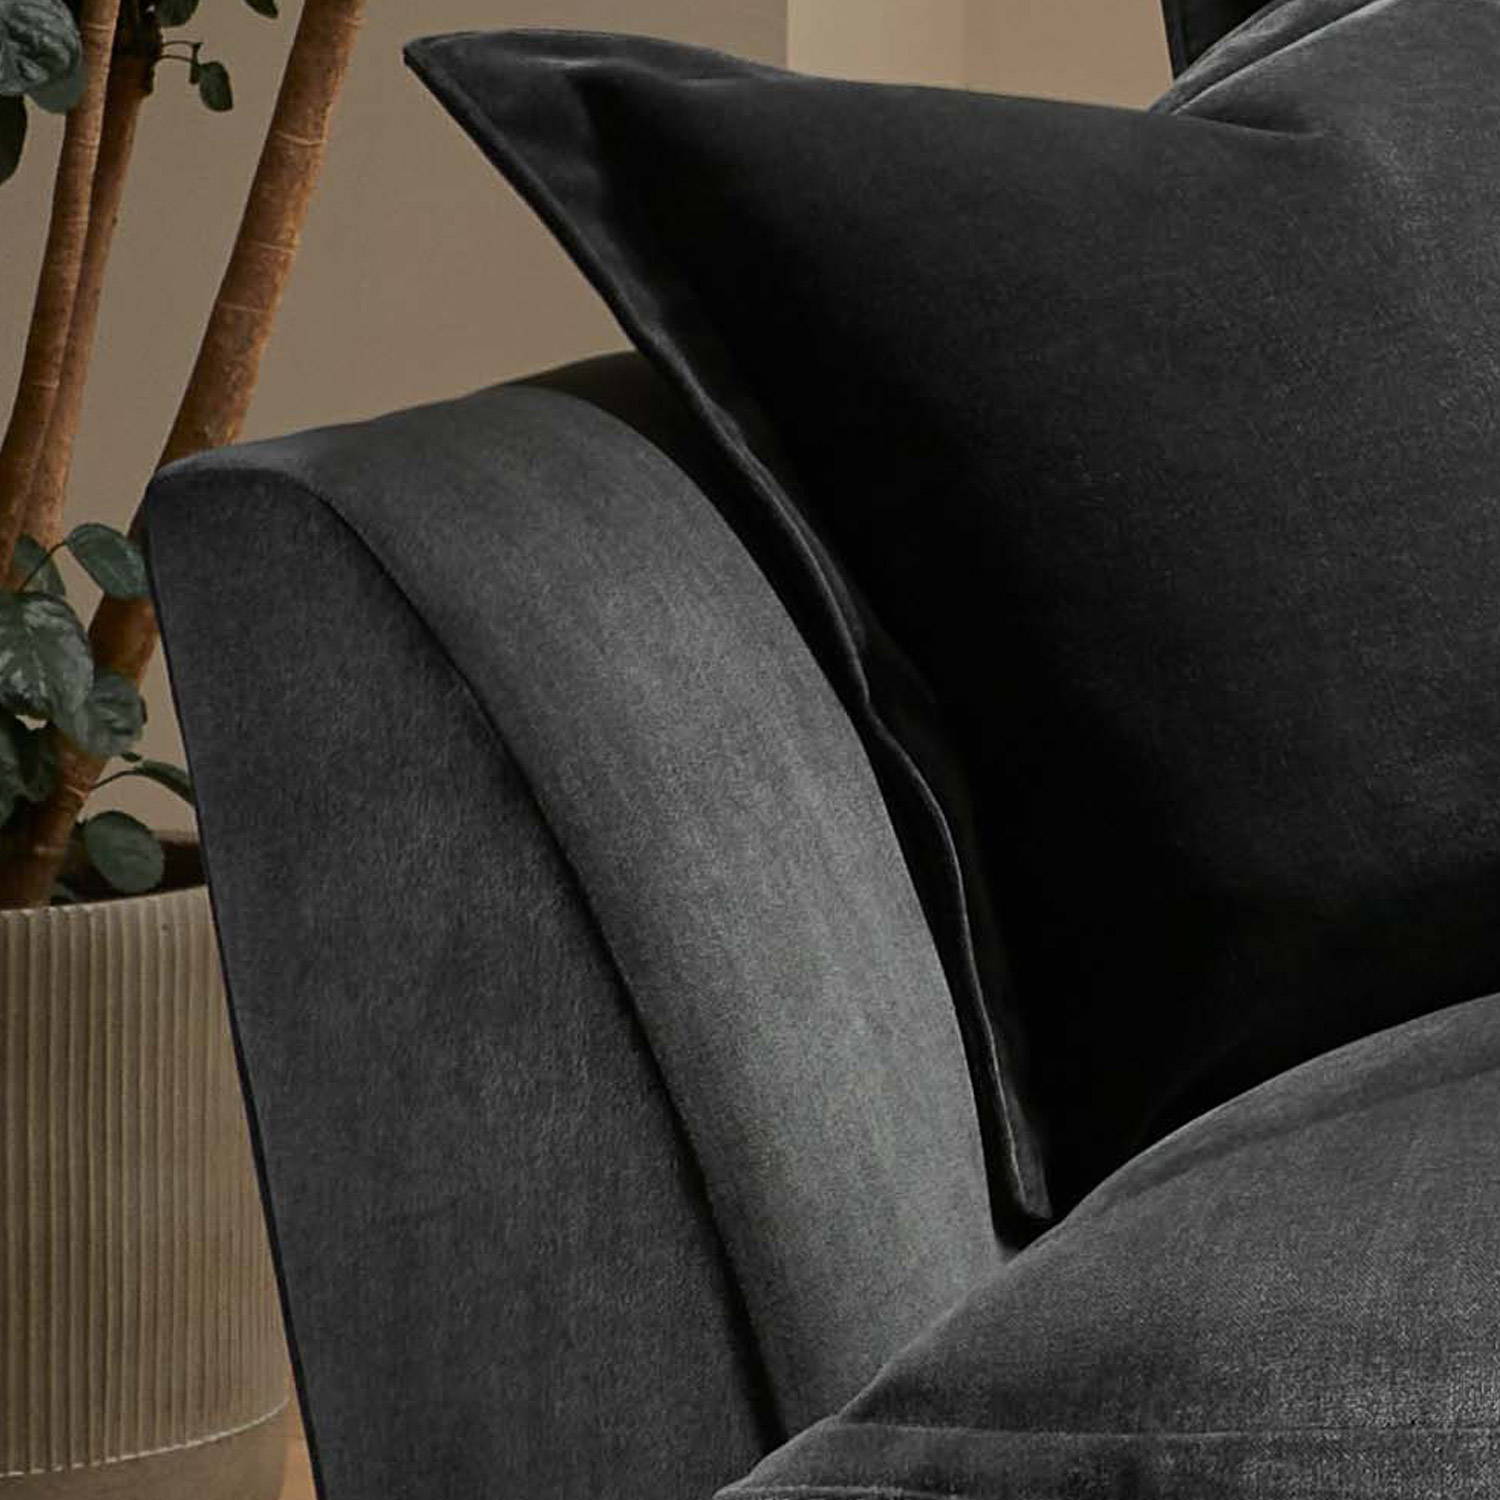 The Roxie Sofa Comes In Loads Of Fabrics - Not Just The Ones Shown Here